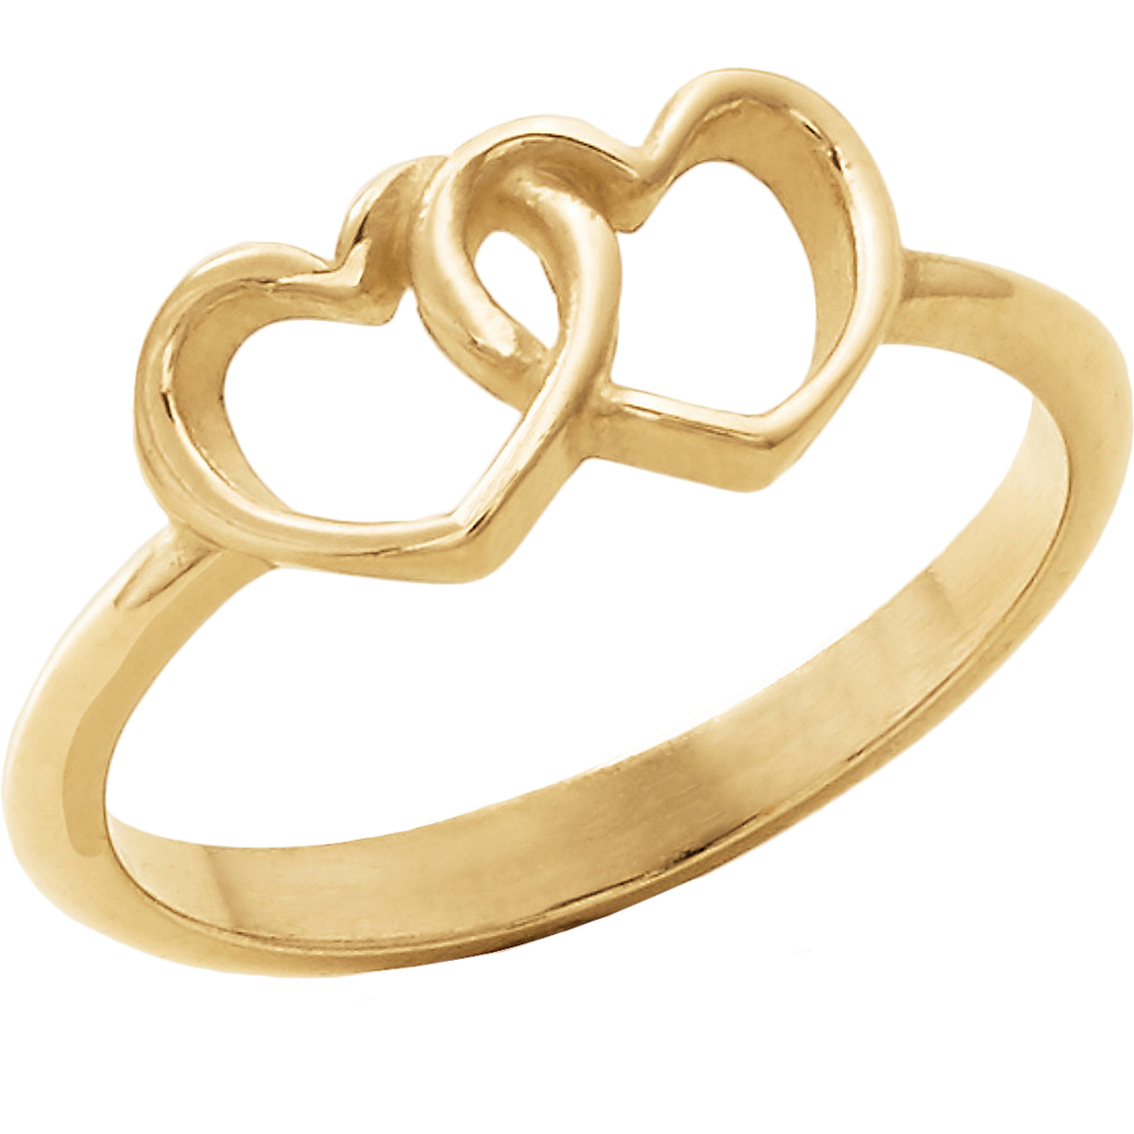 James Avery 14K Yellow Gold Two Hearts Together Ring - Image 2 of 2